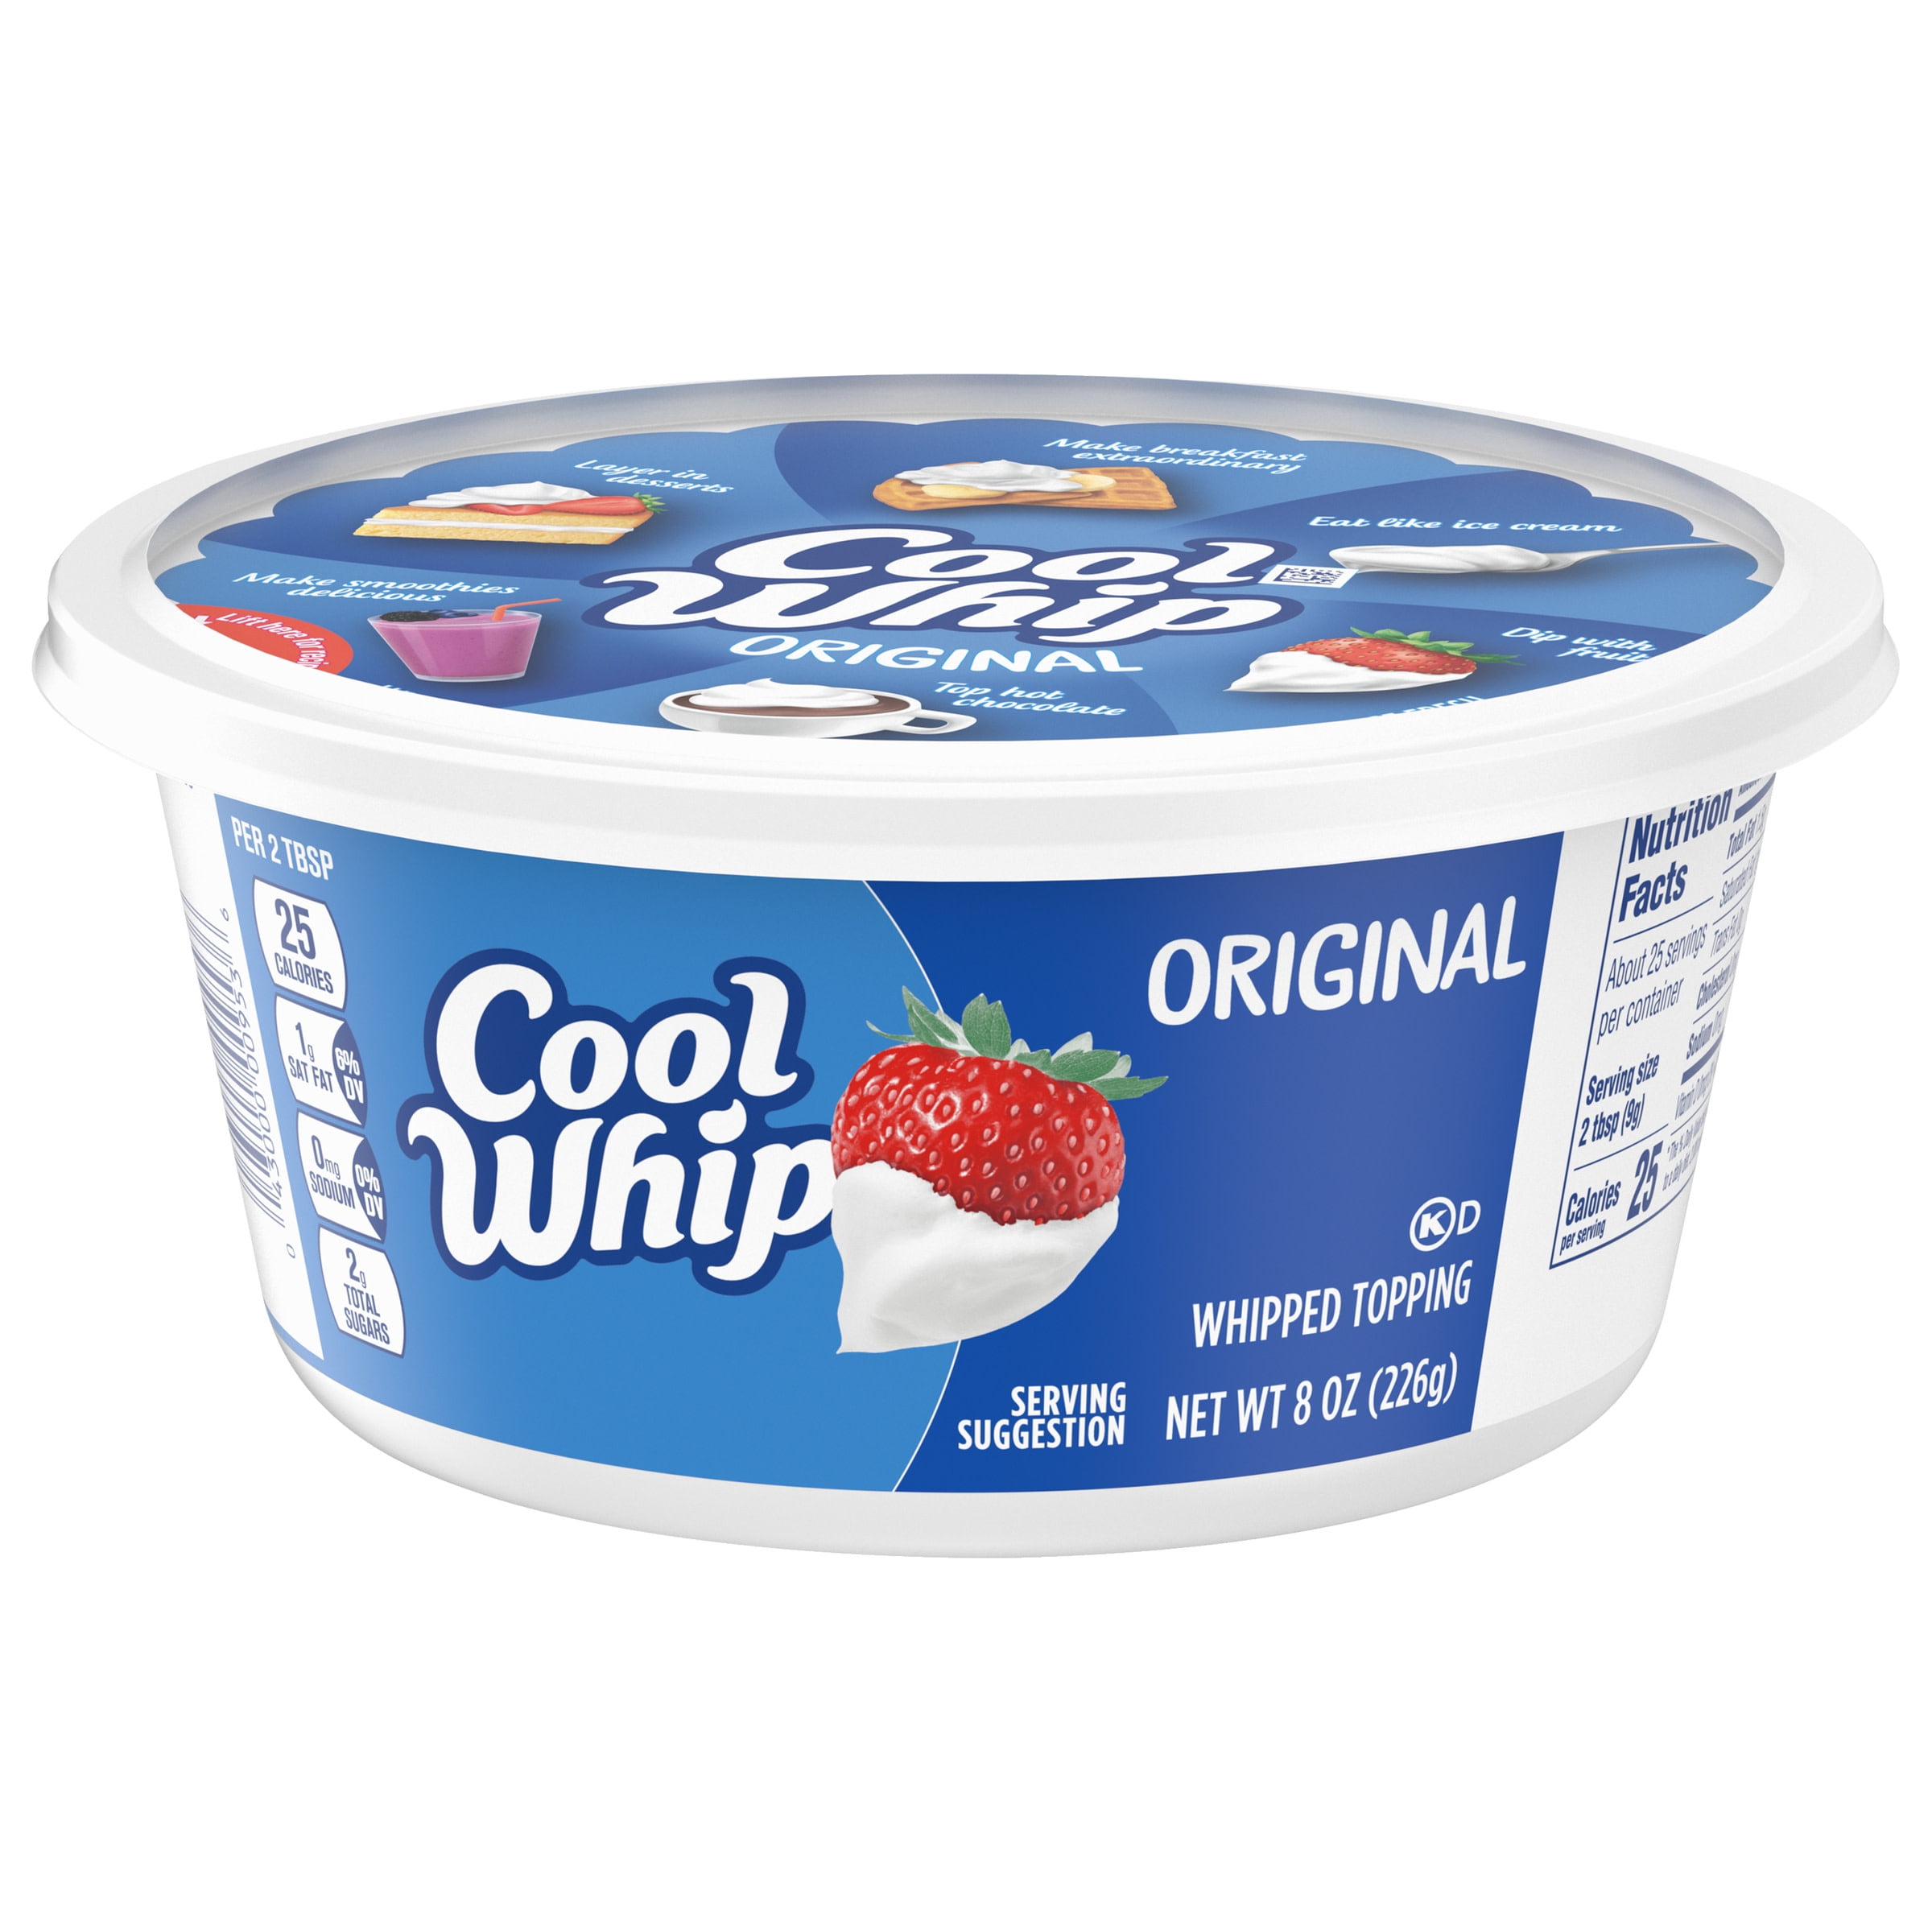 What Is Cool Whip? And Is It Whipped Cream?